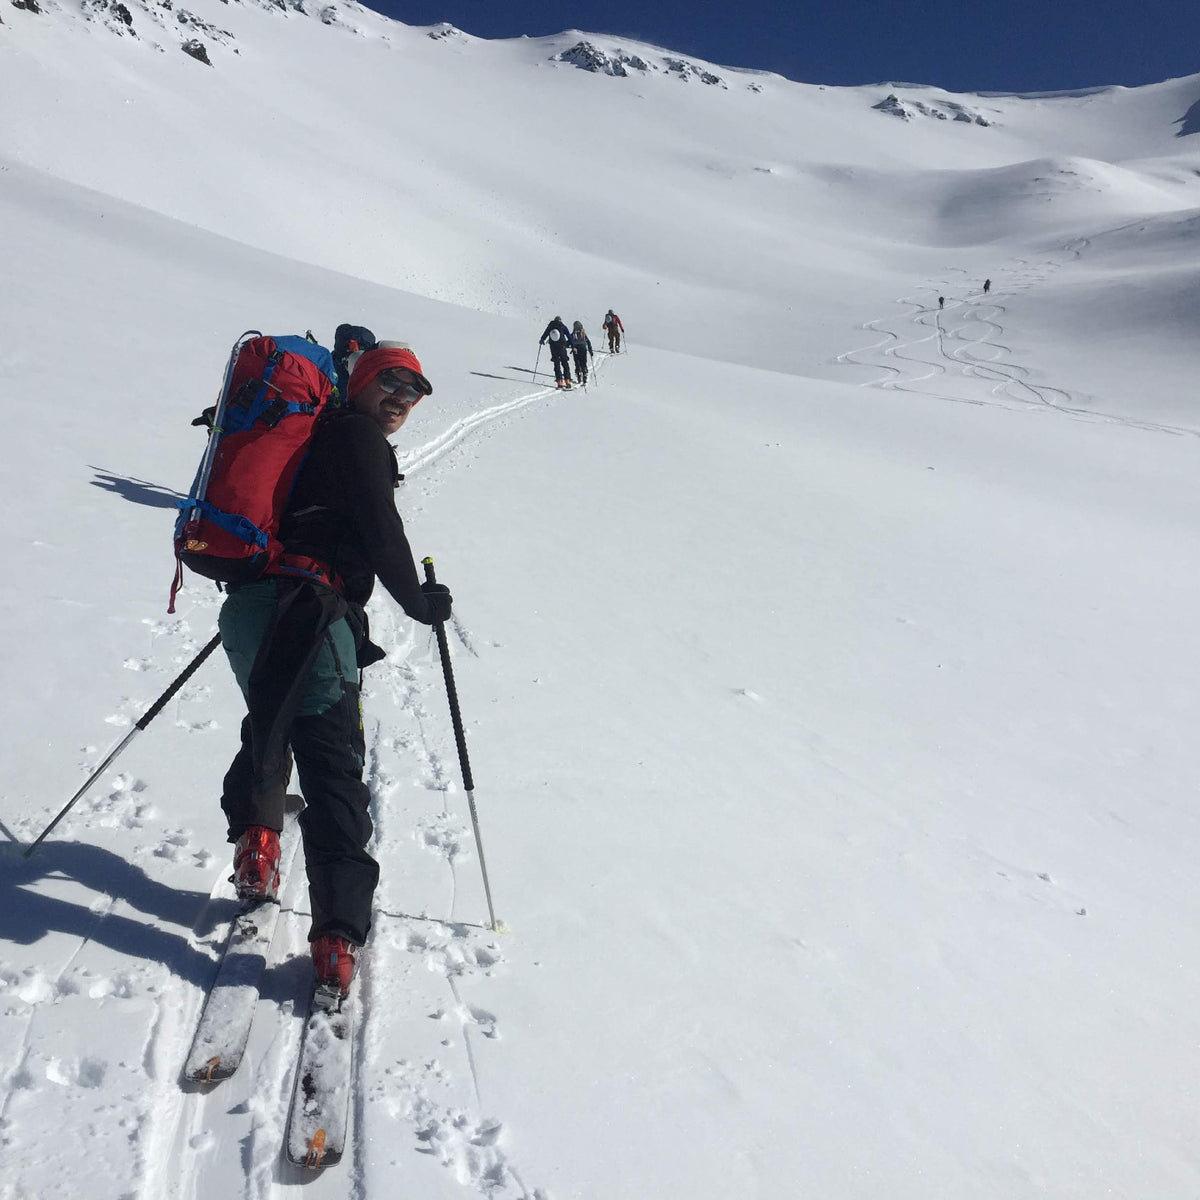 Four Day Avalanche Skills Course (ASC2)